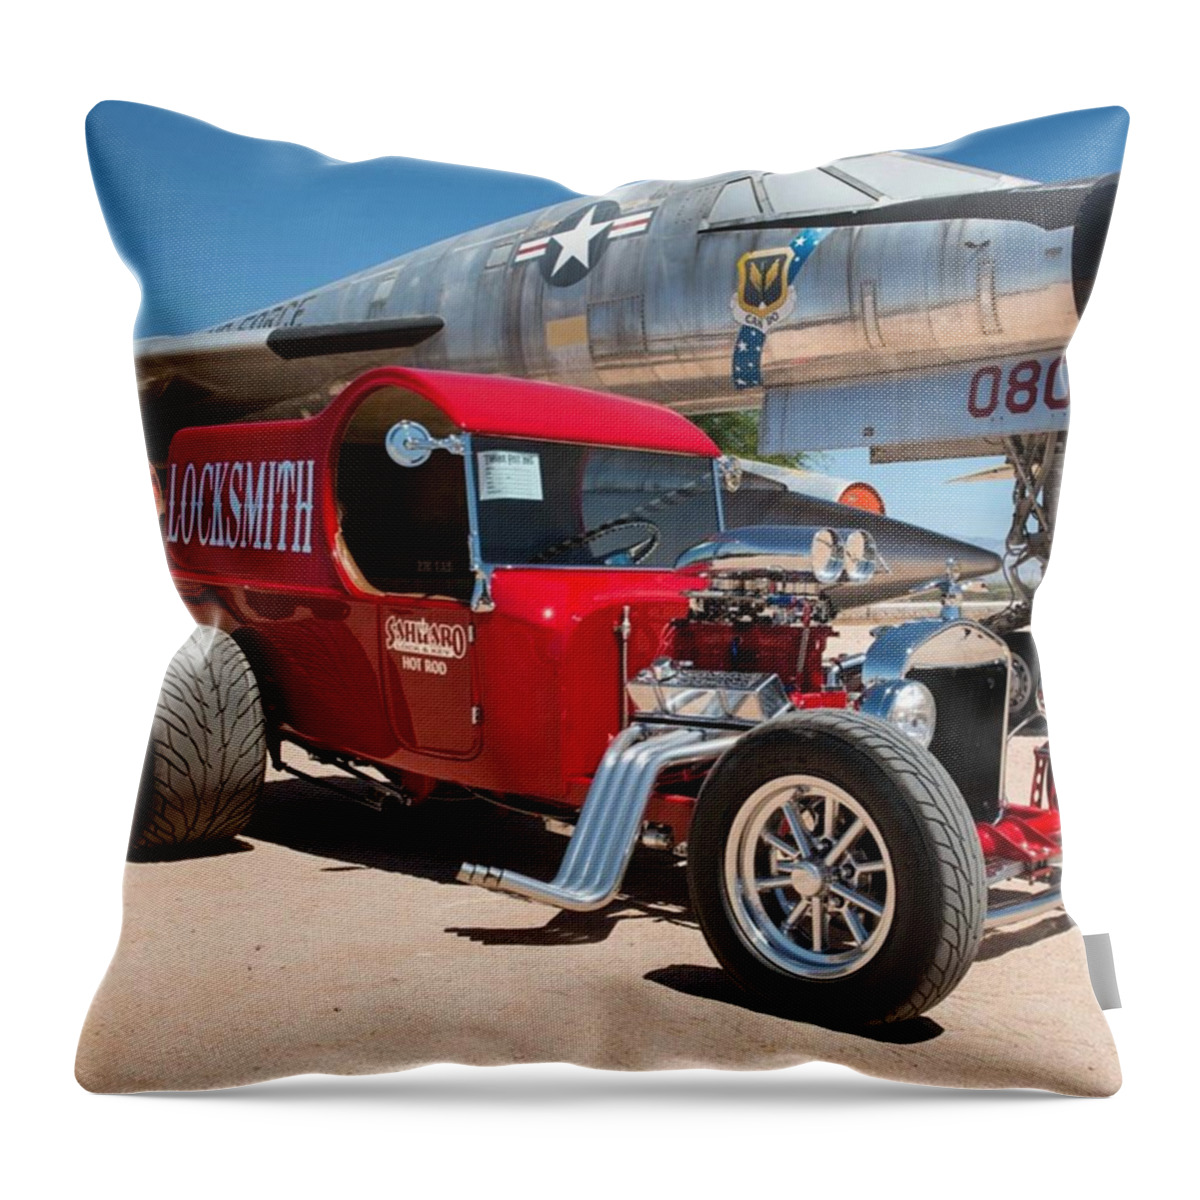 Arizona Throw Pillow featuring the photograph Red Hot Rod Next To Vintage Airplane by Michael Moriarty